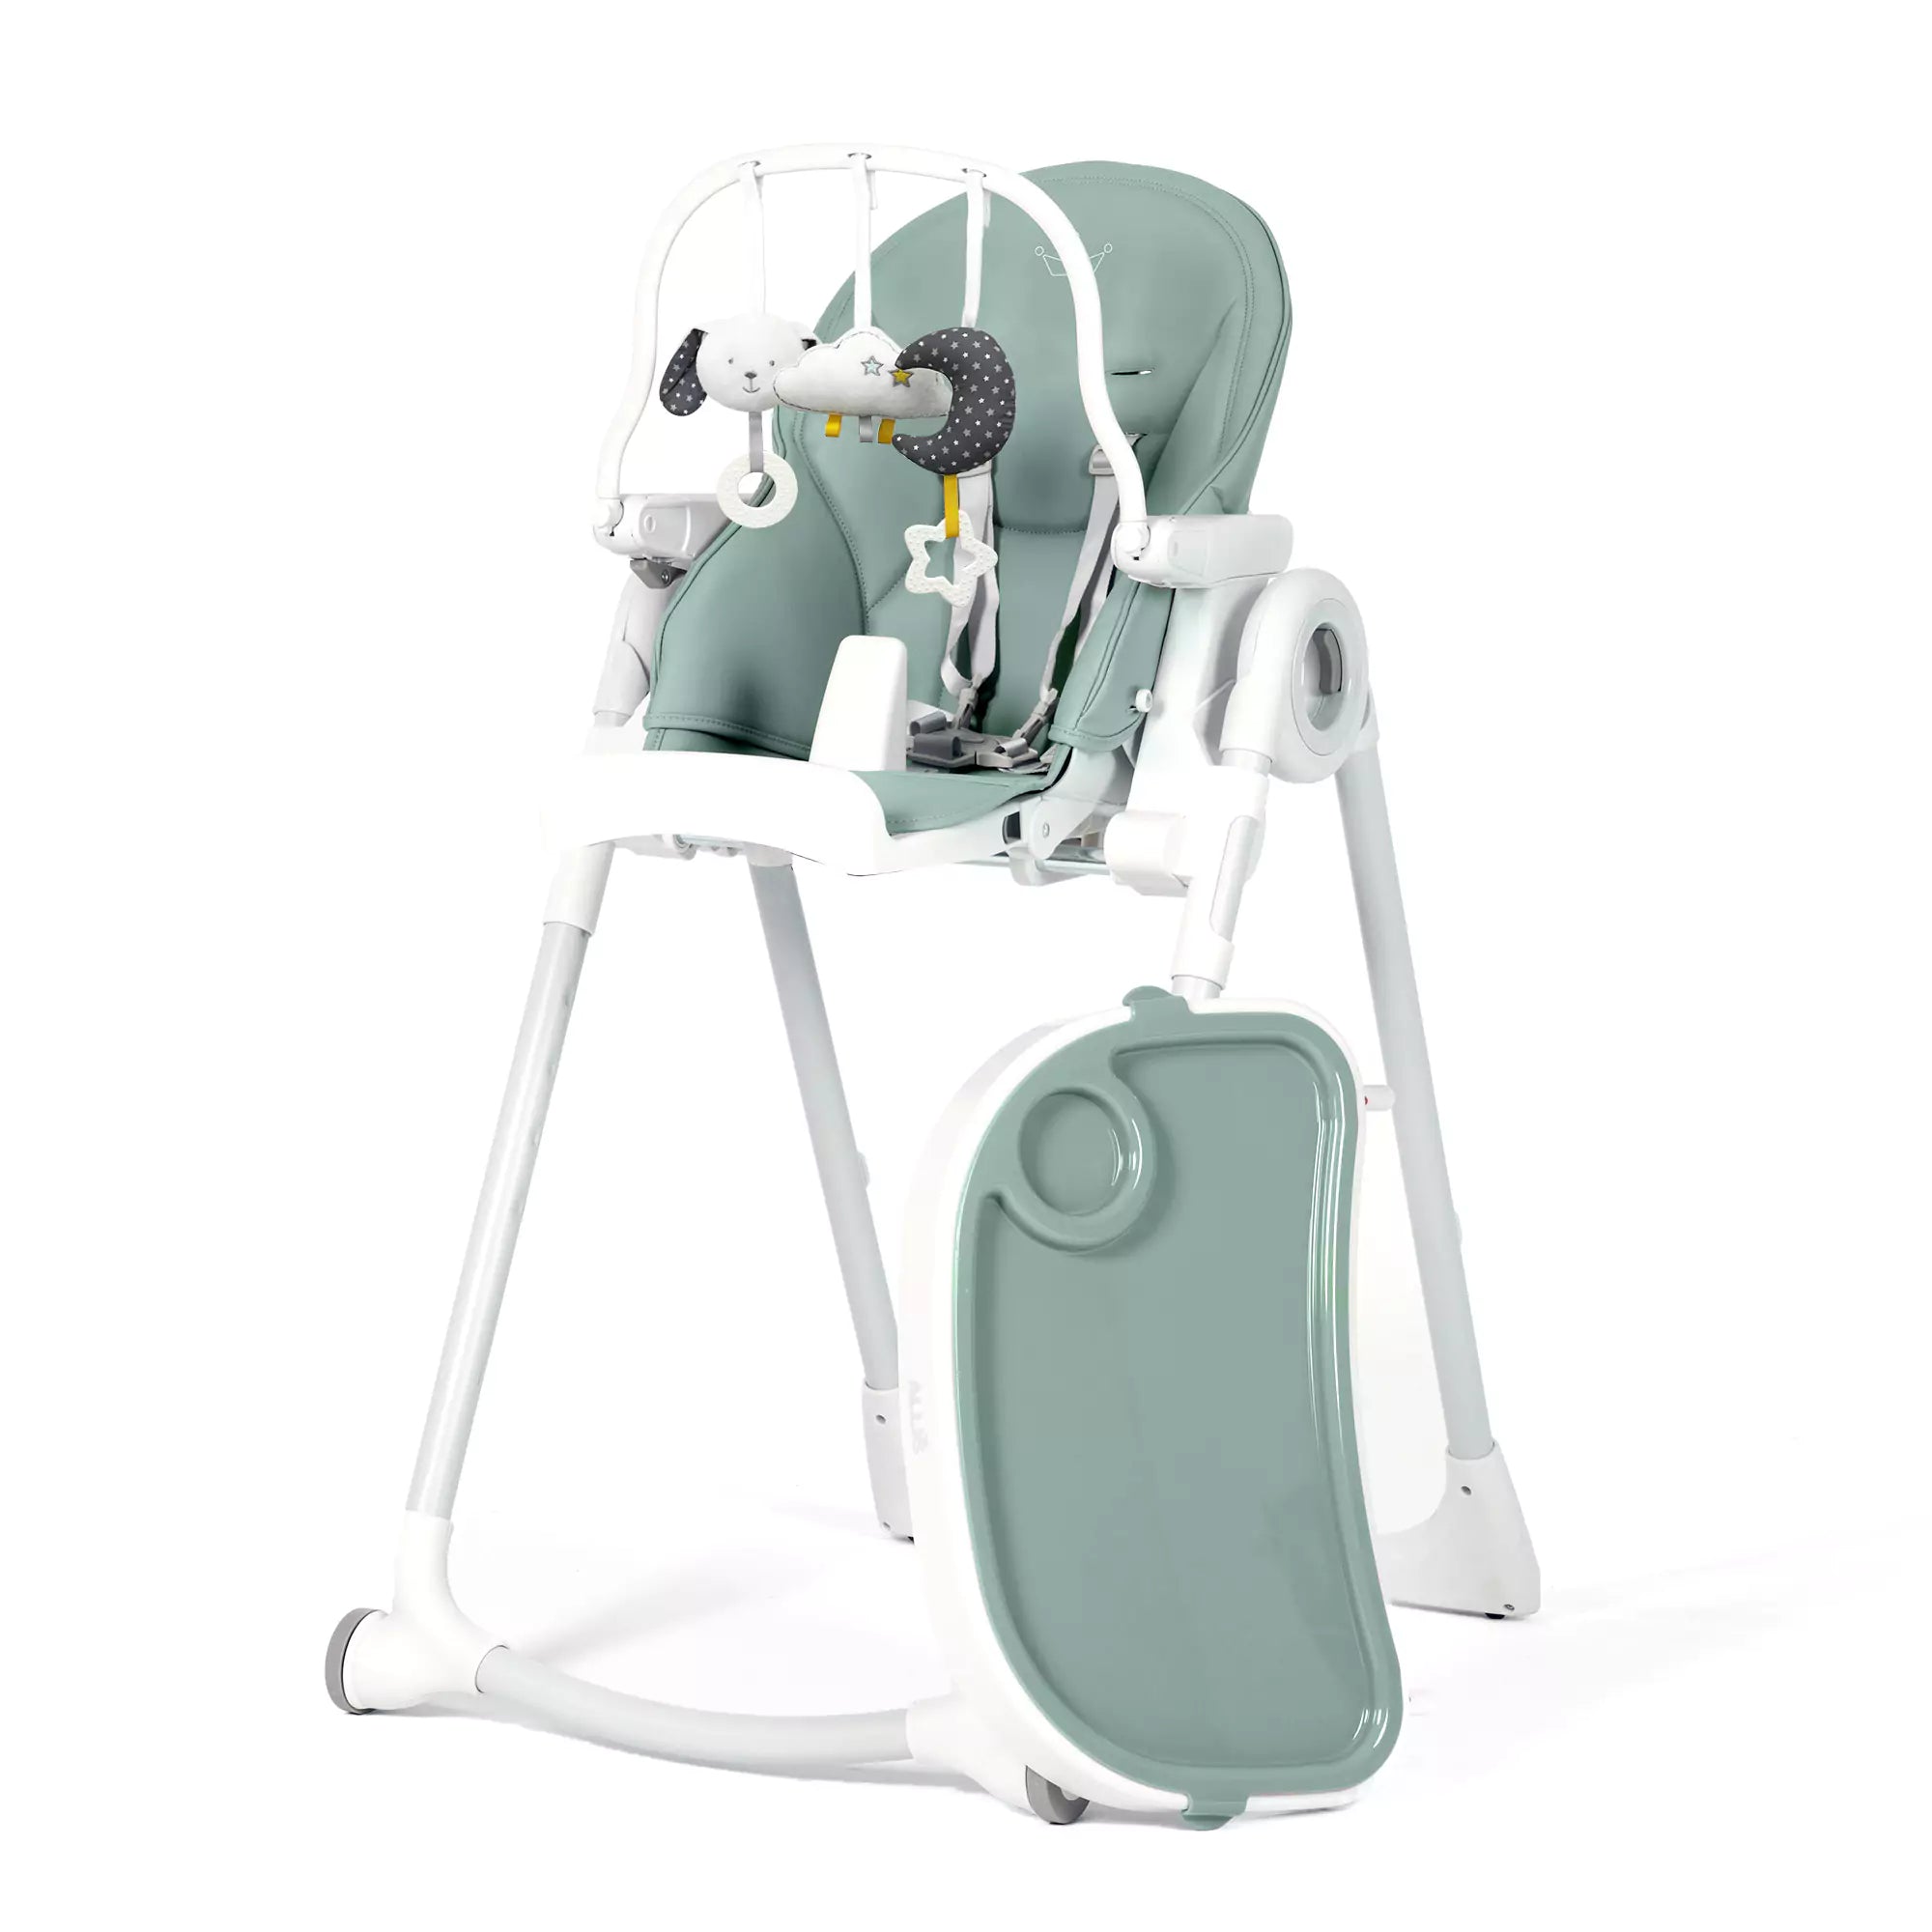 An image of Buy Jade Green Foldable High Chair: Stylish & Safe